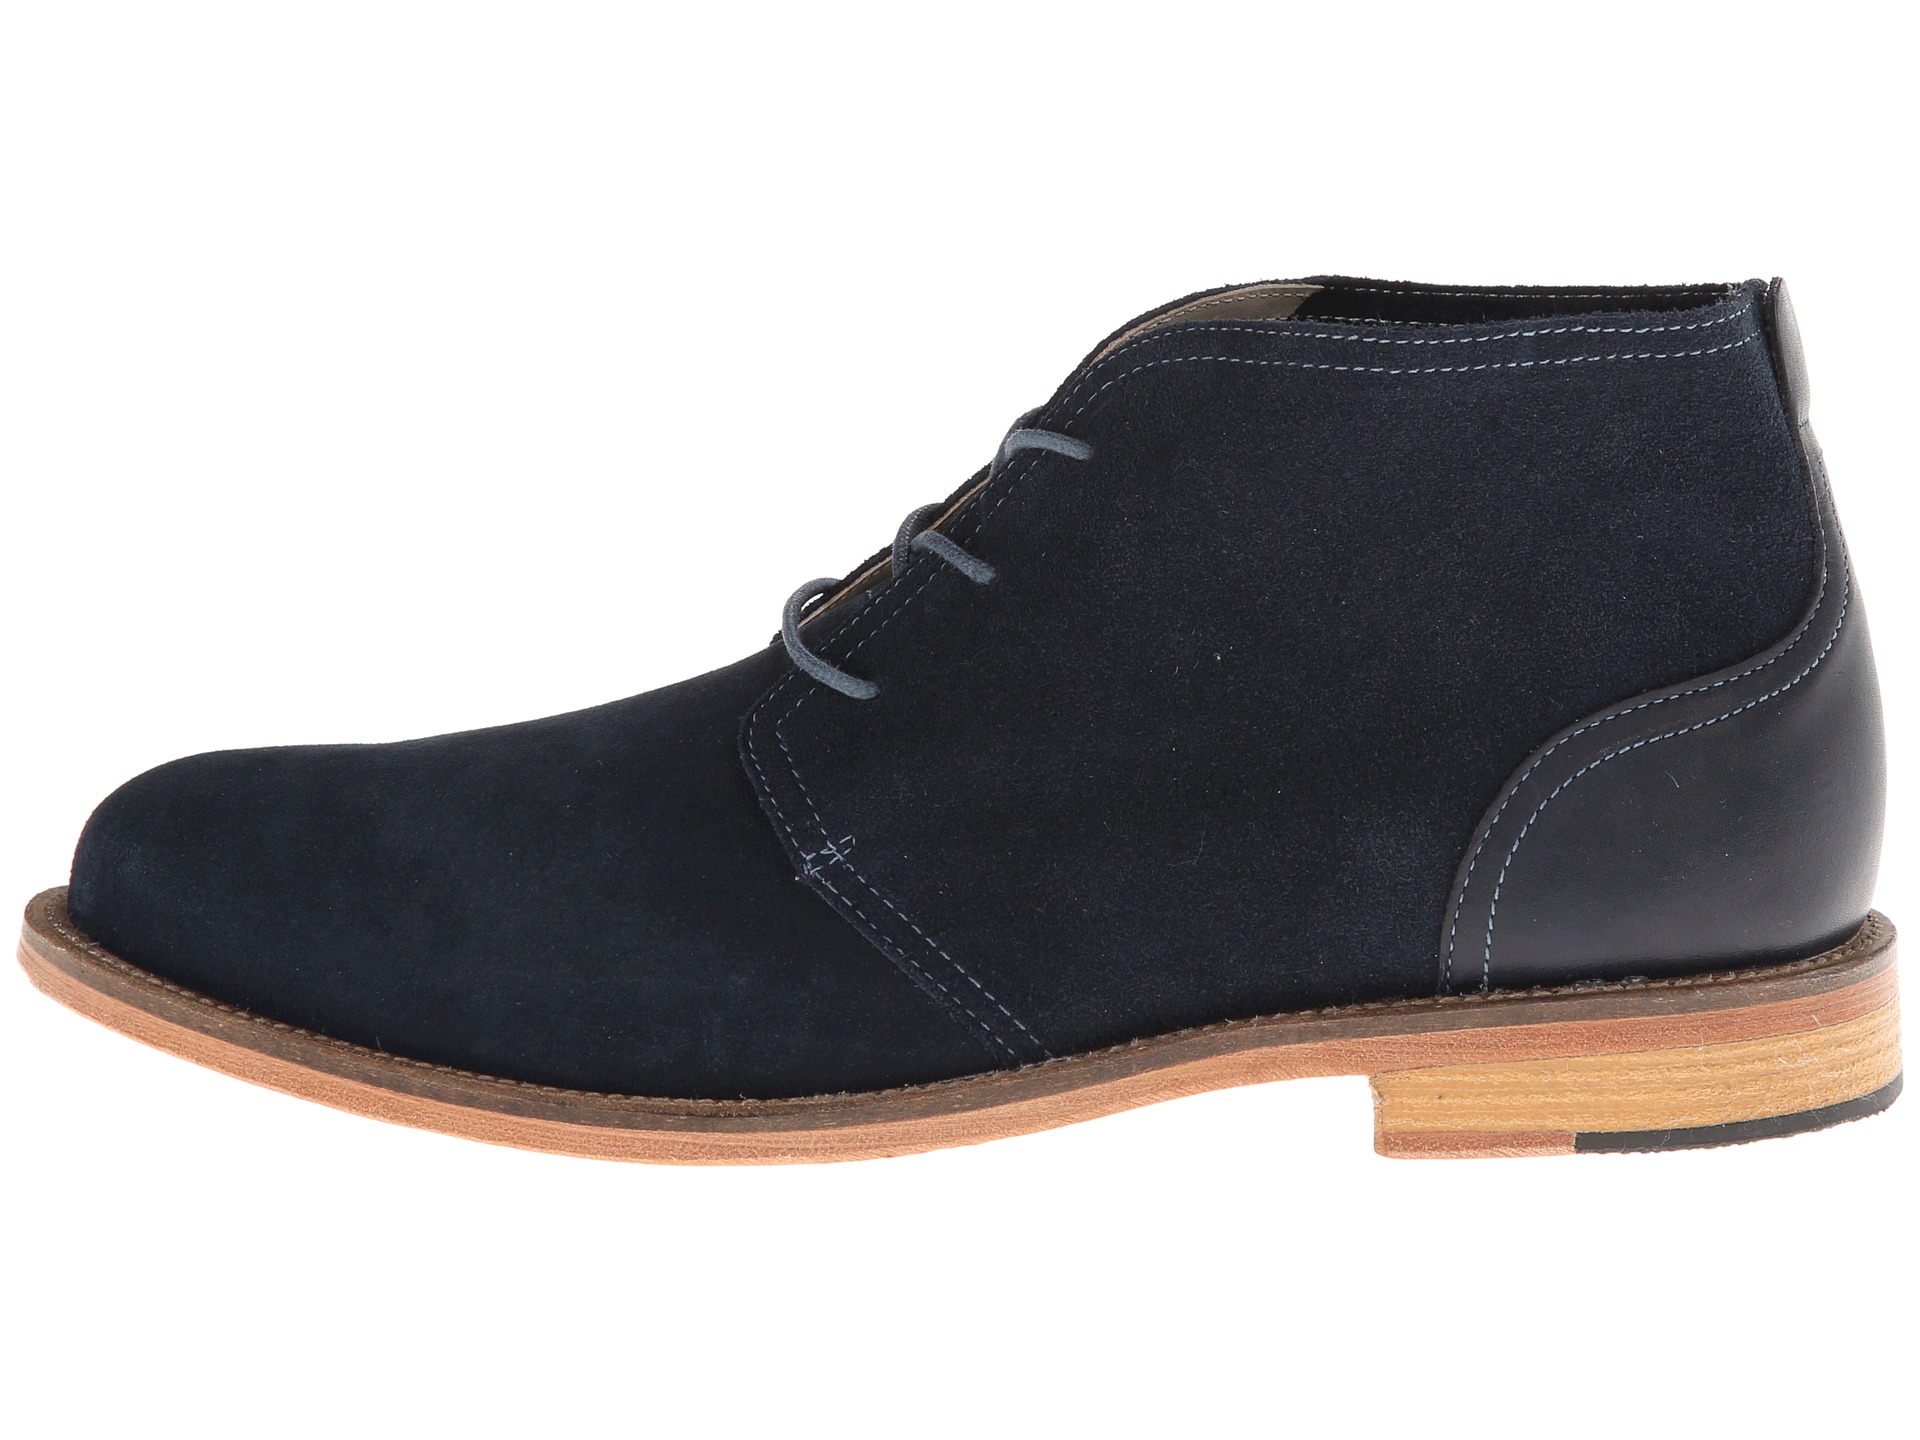 Shoes Monarch Navy - Zappos Free Shipping BOTH Ways